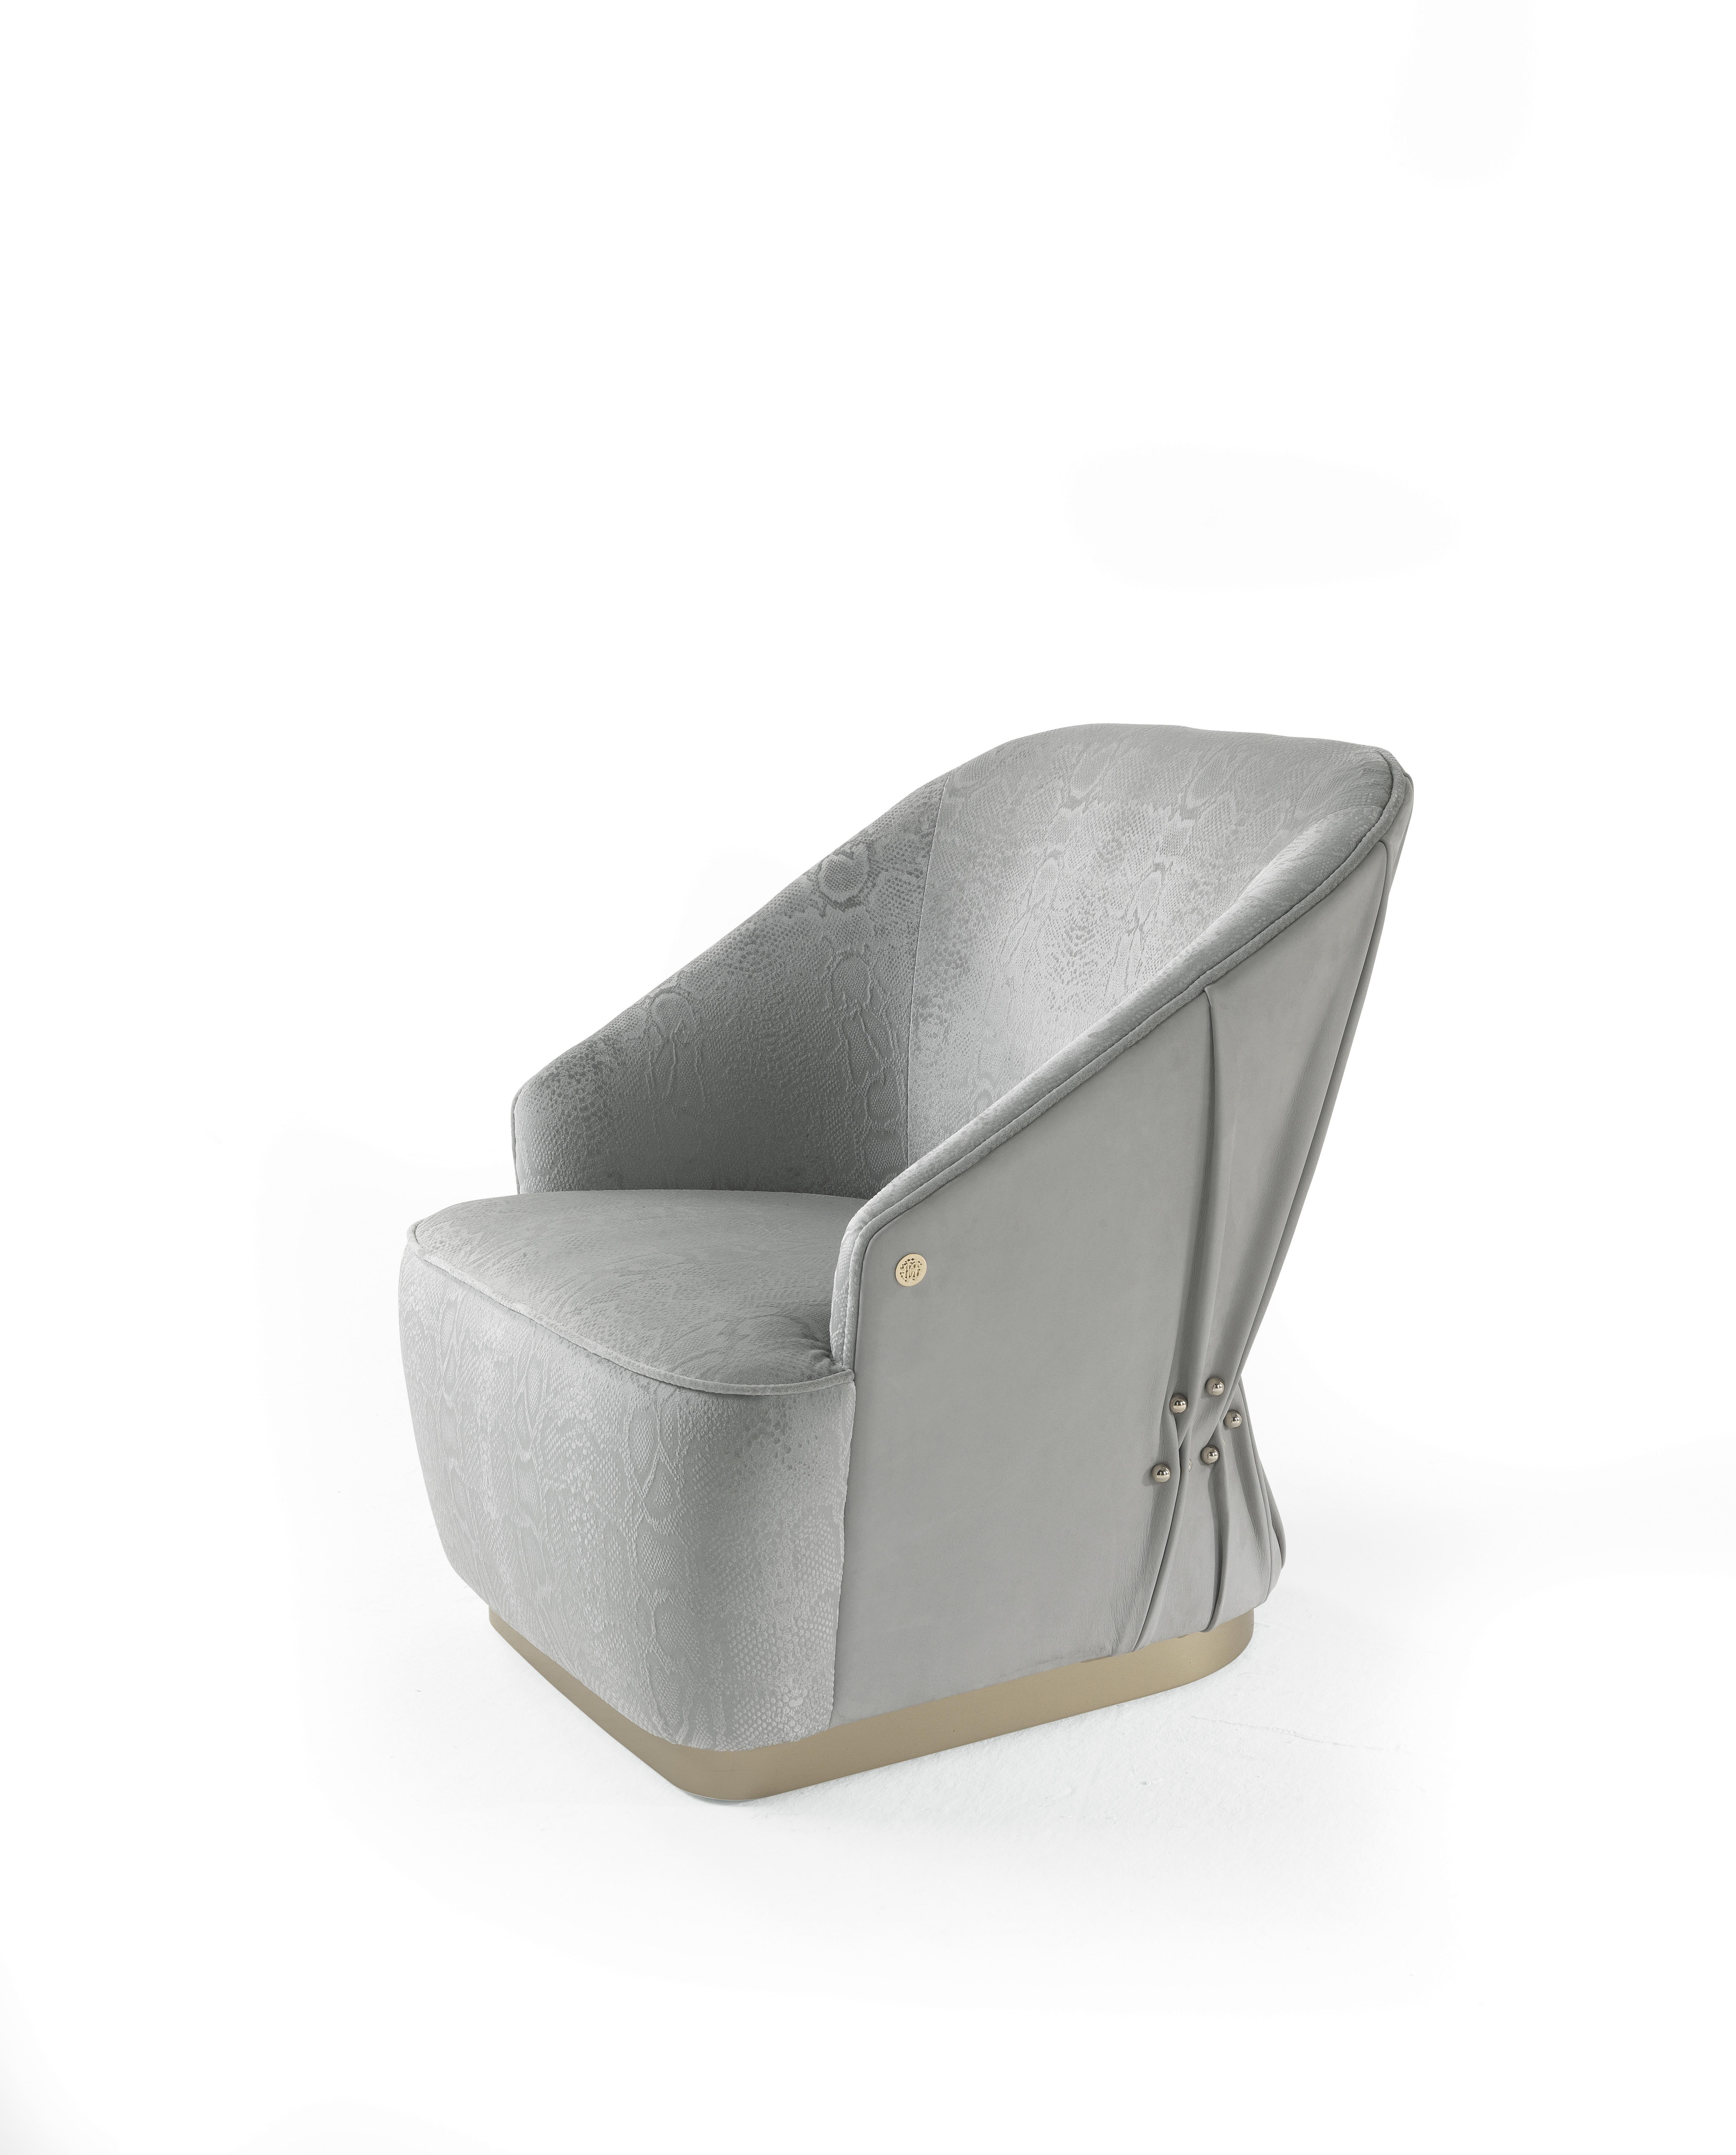 Modern 21st Century Inanda Armchair in Leather by Roberto Cavalli Home Interiors For Sale